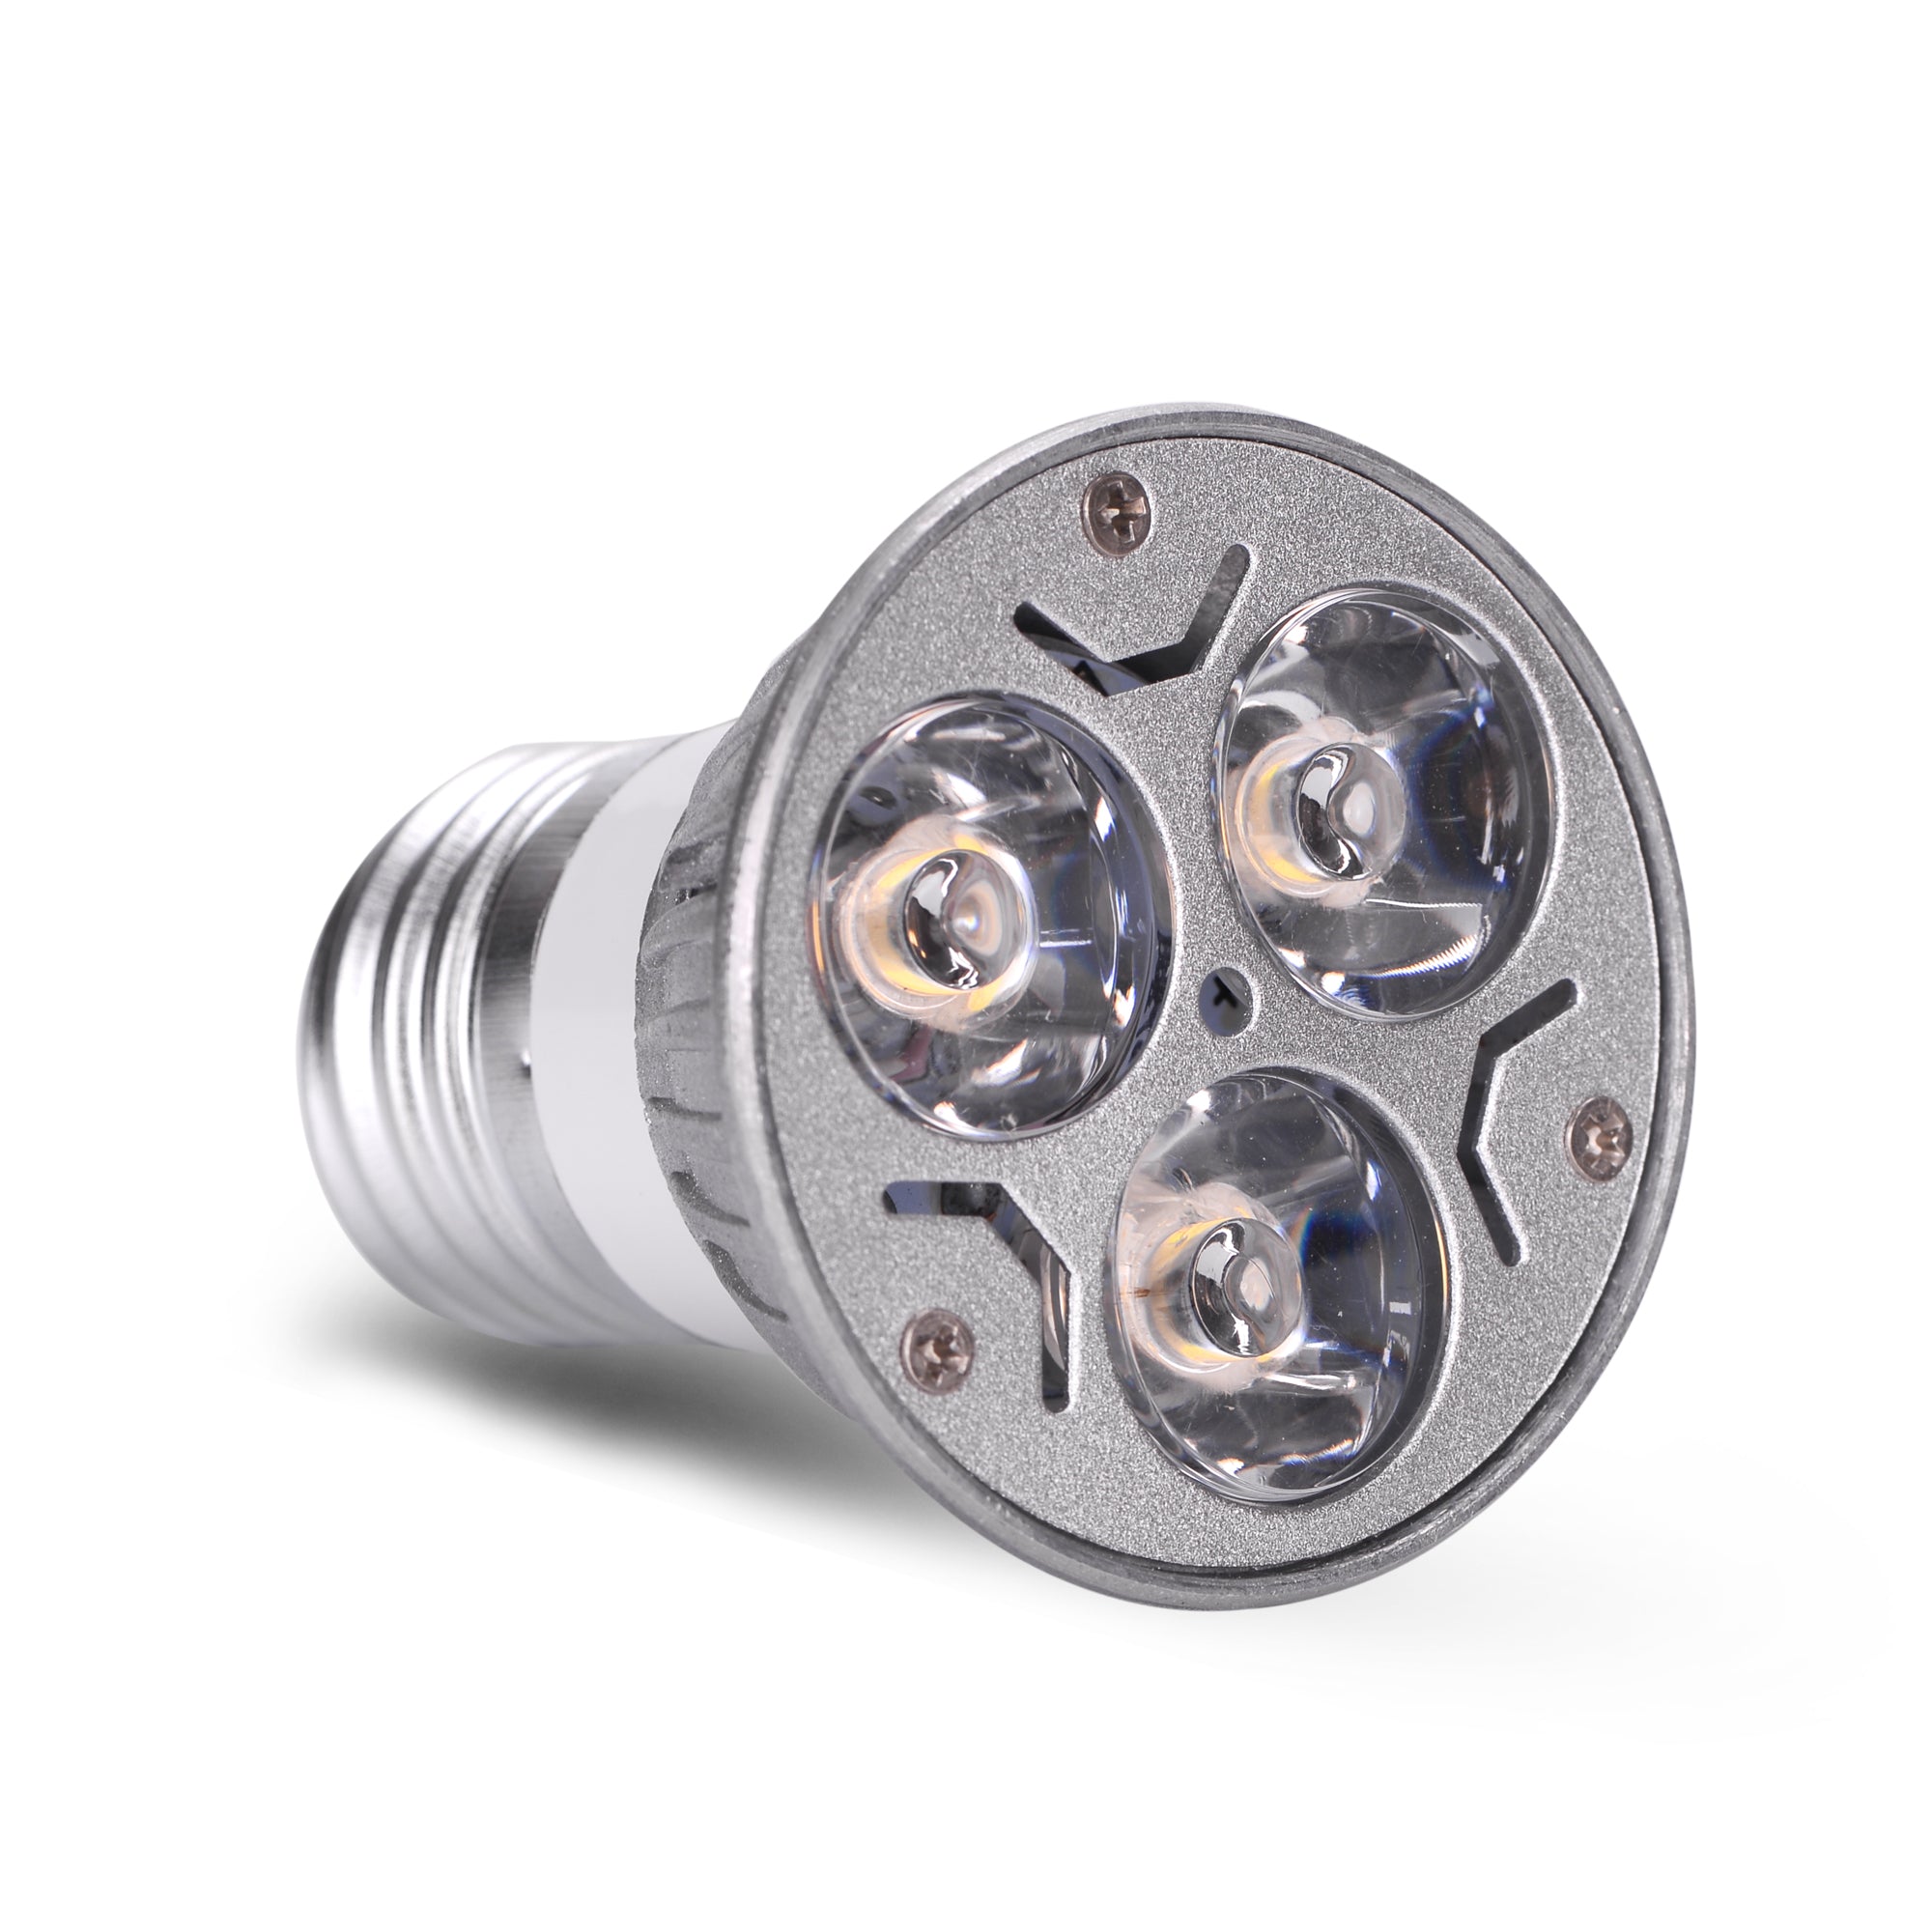 Low Voltage 12 Volt LED-lampen for RV E26 / E27 Medium Schroef in